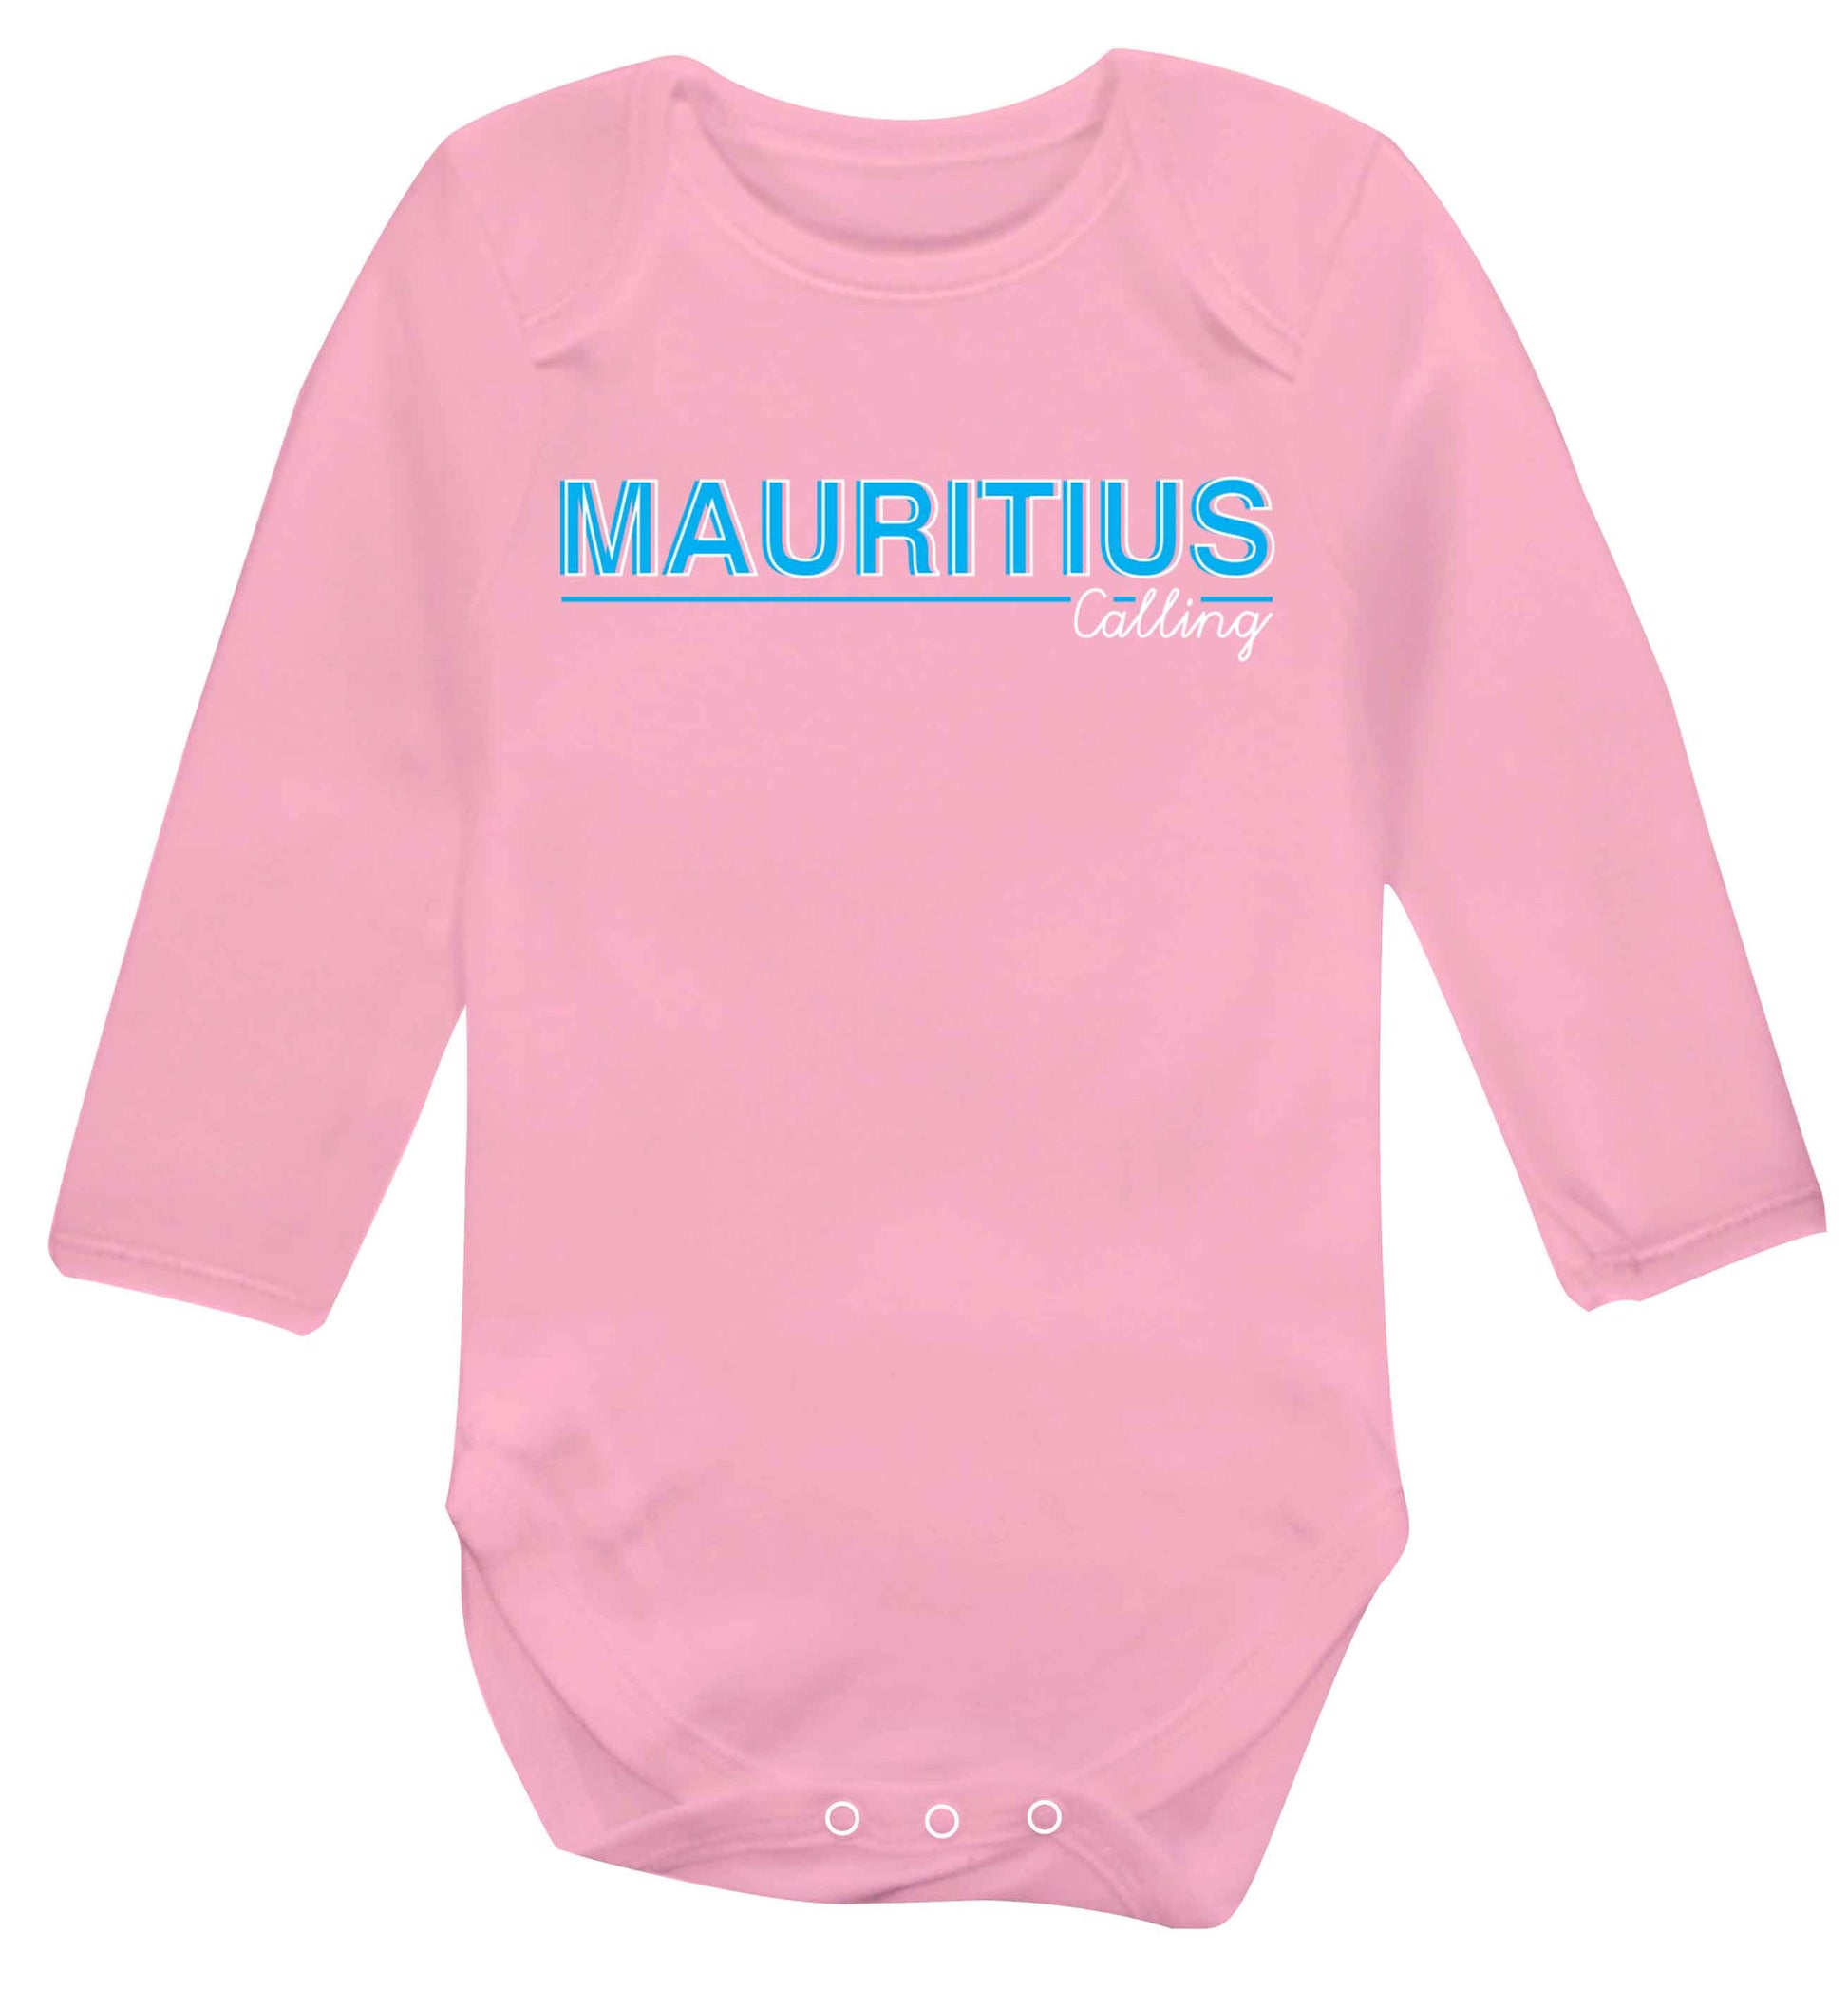 Mauritius calling Baby Vest long sleeved pale pink 6-12 months